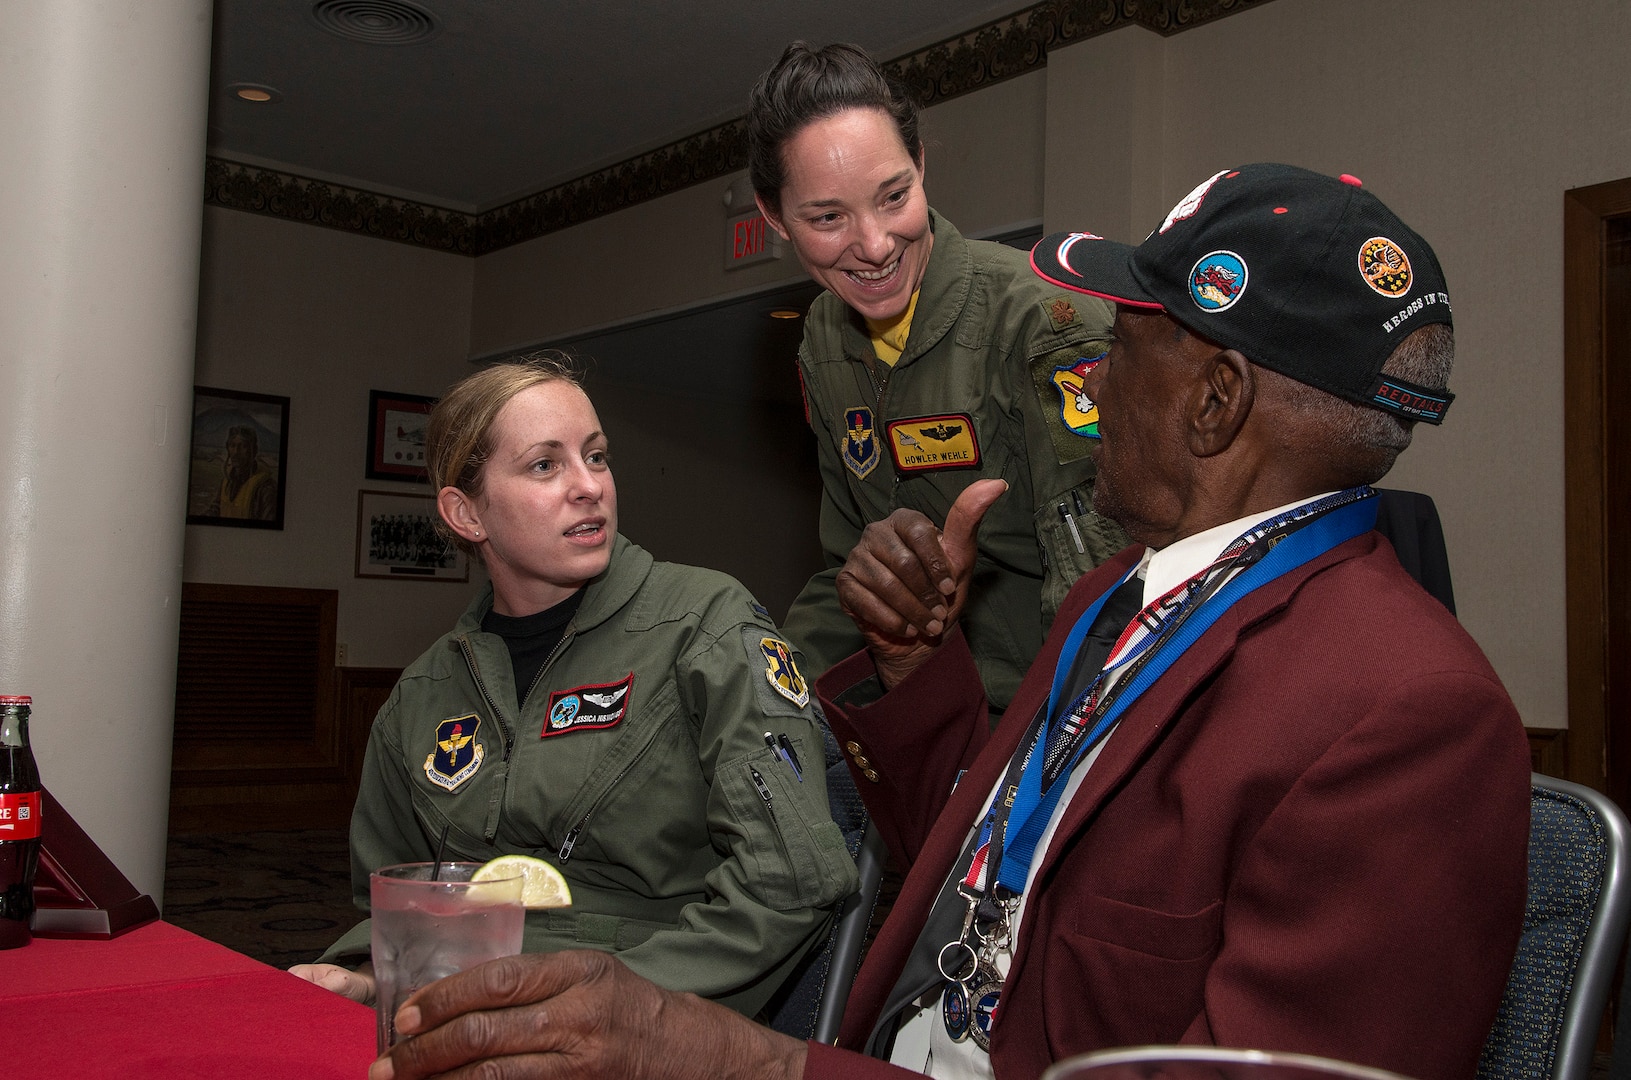 First Lieutenant Jessica Niswonger, 435th Flying Training Squadron, and Maj. Kristen Wehle, 451st Flying Training Squadron, visits with Mr. Theodore Johnson, documented original Tuskegee Airmen, during the Tuskegee Airmen Tribute, June 12, 2015, at Joint Base San Antonio-Randolph’s Parr Club.  Members of the JBSA-Randolph community celebrated the legacy of the first all-black unit by paying tribute to seven of the documented original Tuskegee Airmen members.  The Tuskegee Airmen distinguished themselves during World War II with more than 15,500 sorties and 1,500 missions in Europe and North Africa and earned numerous combat awards.  The event featured musical entertainment, comments by 12th Flying Training Wing leaders, an introduction of four Tuskegee Airmen present and a presentation of gifts to them. Members of the audience had an opportunity to mingle with the Tuskegee Airmen and listen to their stories. (U.S. Air Force photo by Johnny Saldivar/released)